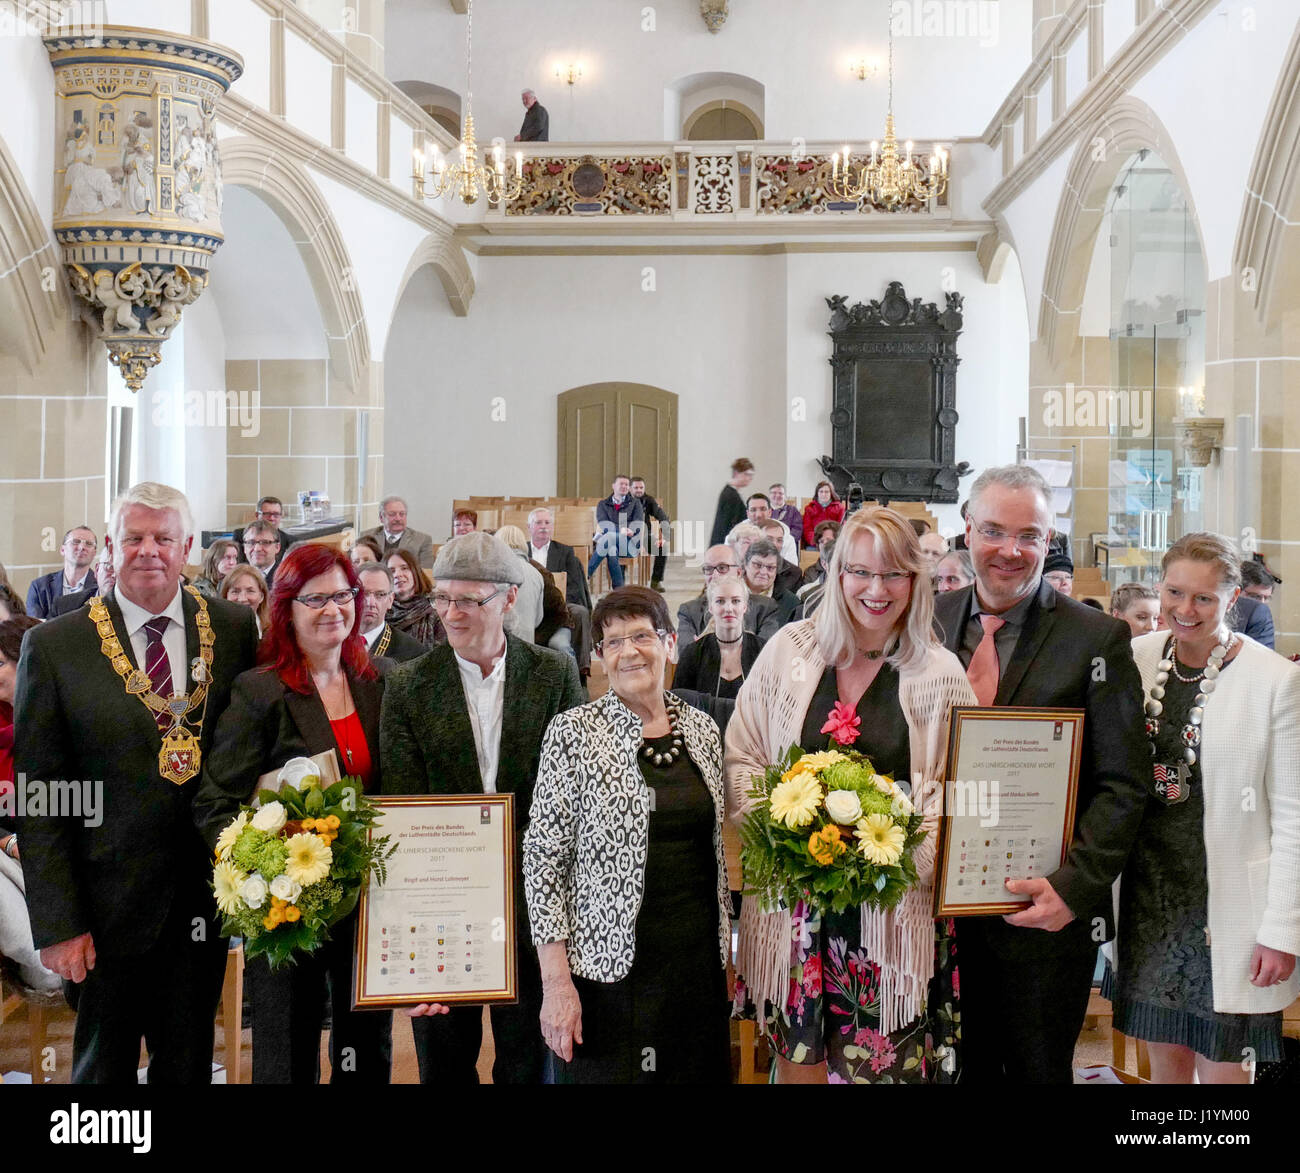 The award winners for the prize 'The unafraid word': the former mayor couple Markus and Susanna Nierth (L) from Troeglitz in Saxony-Anhalt, the artist couple Horst and Birgit Lohmeyer (R) from Jamel stand together with the laudator and former president of the German parliament Rita Suessmuth (M), in the Palace Church at the Palace Hartenfels in Torgau, Germany, 22 April 2017. Also depicted are the mayor of Worms, Michael Kissel (L) and the mayor of Torgau, Romina Barth (R). The prize is awarded every two year and endowed with 10,000 euros. Photo: Peter Endig/dpa-Zentralbild/dpa Stock Photo